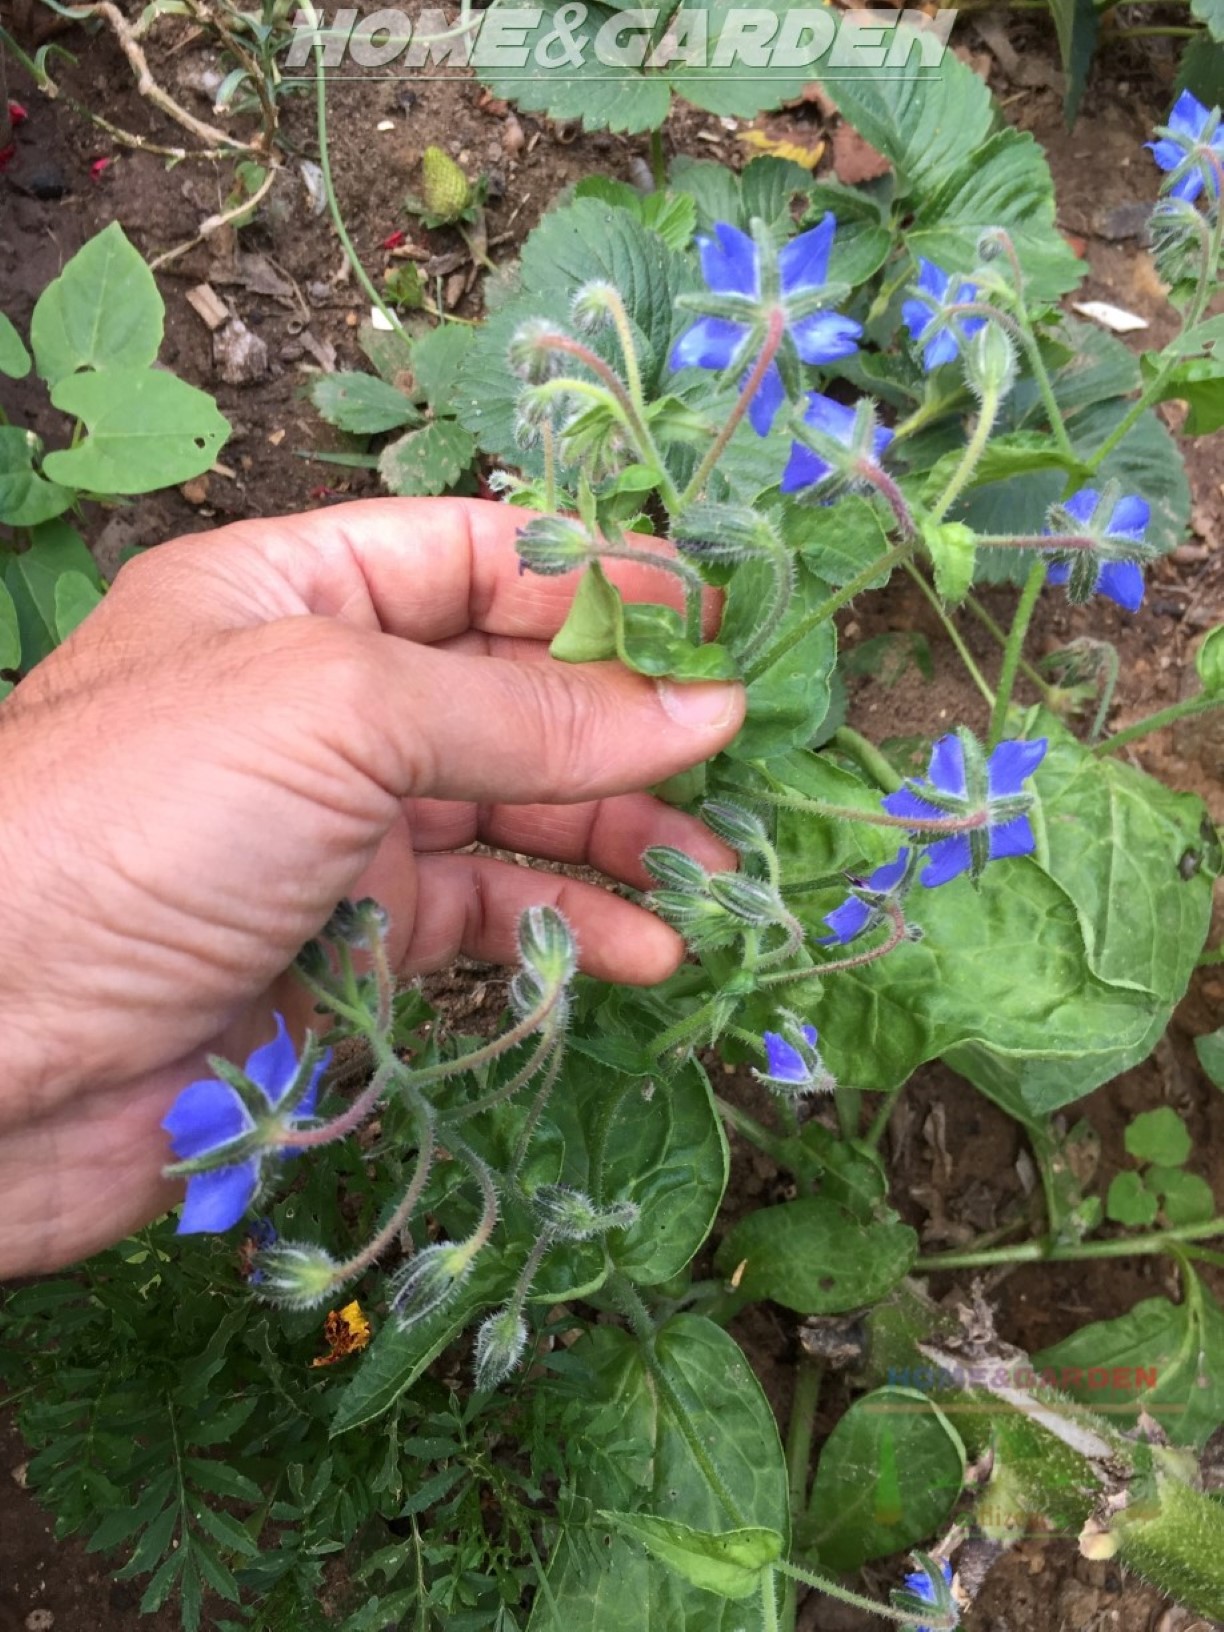 The benefits of borage are so many from repelling pests such as hornworms, attracting pollinators, until aiding any plants it is interplanted with, by increasing resistance to pests and disease. Borage has a reputation for improving the flavor and growth of strawberries.